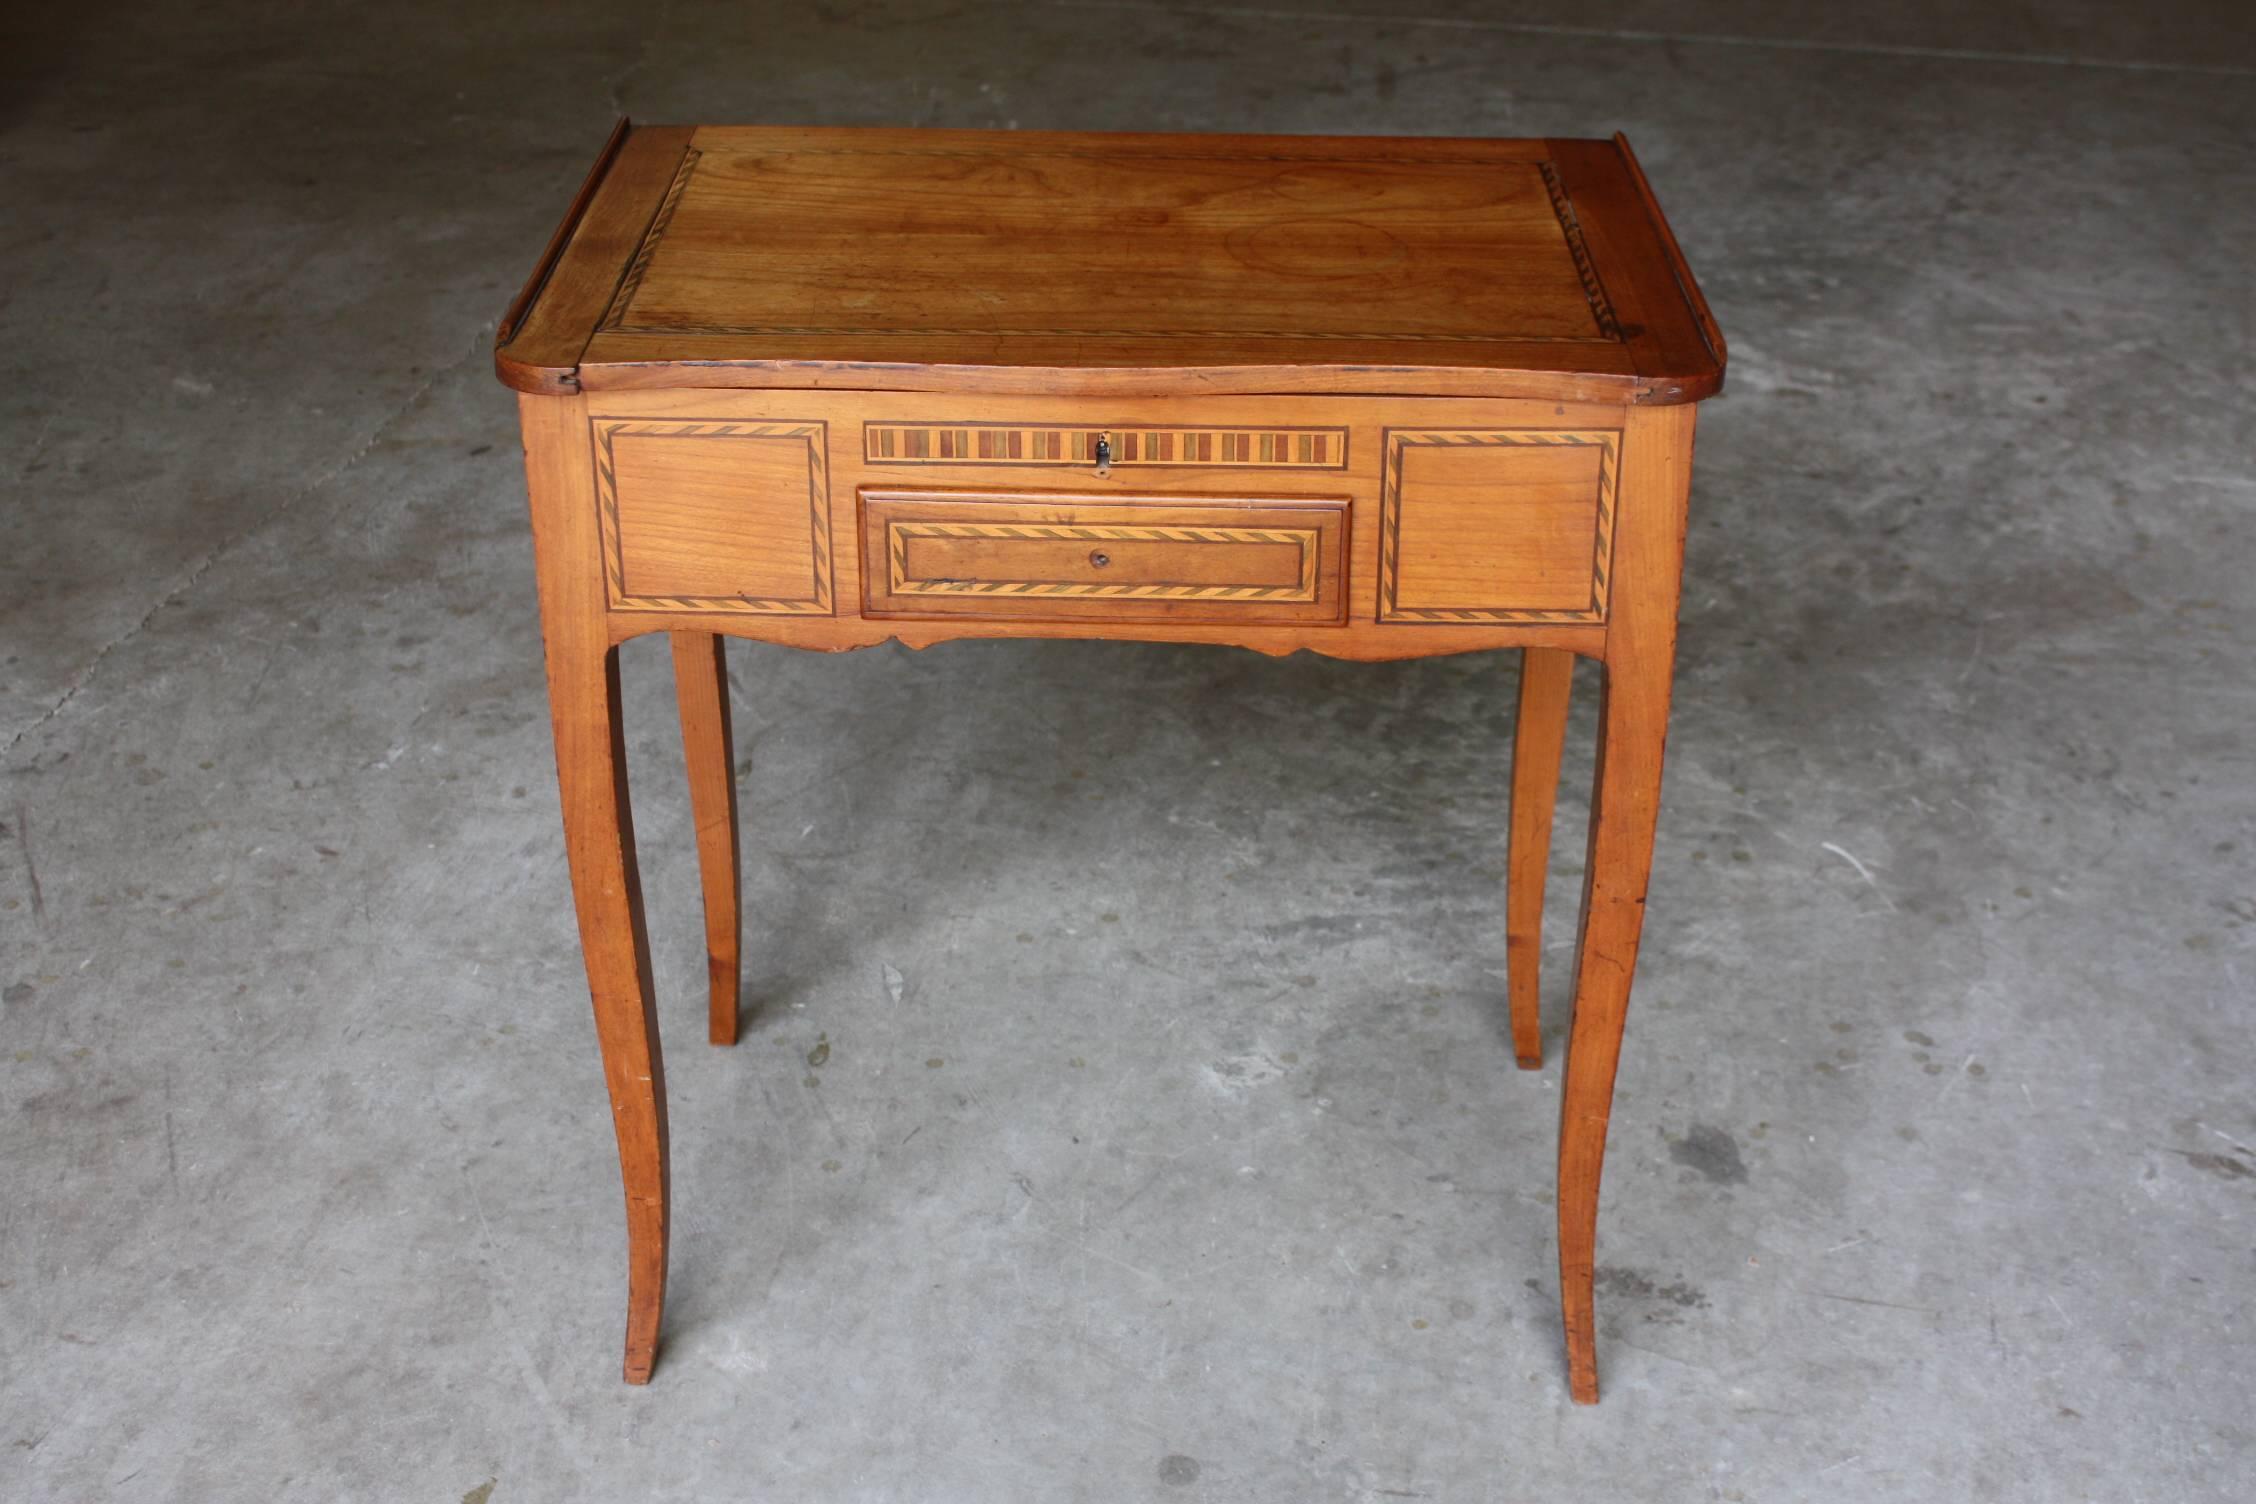 A very elegant small desk made of walnut. This was produced in French style in the circa 1860s. This desk is in excellent condition throughout and ready for your home.